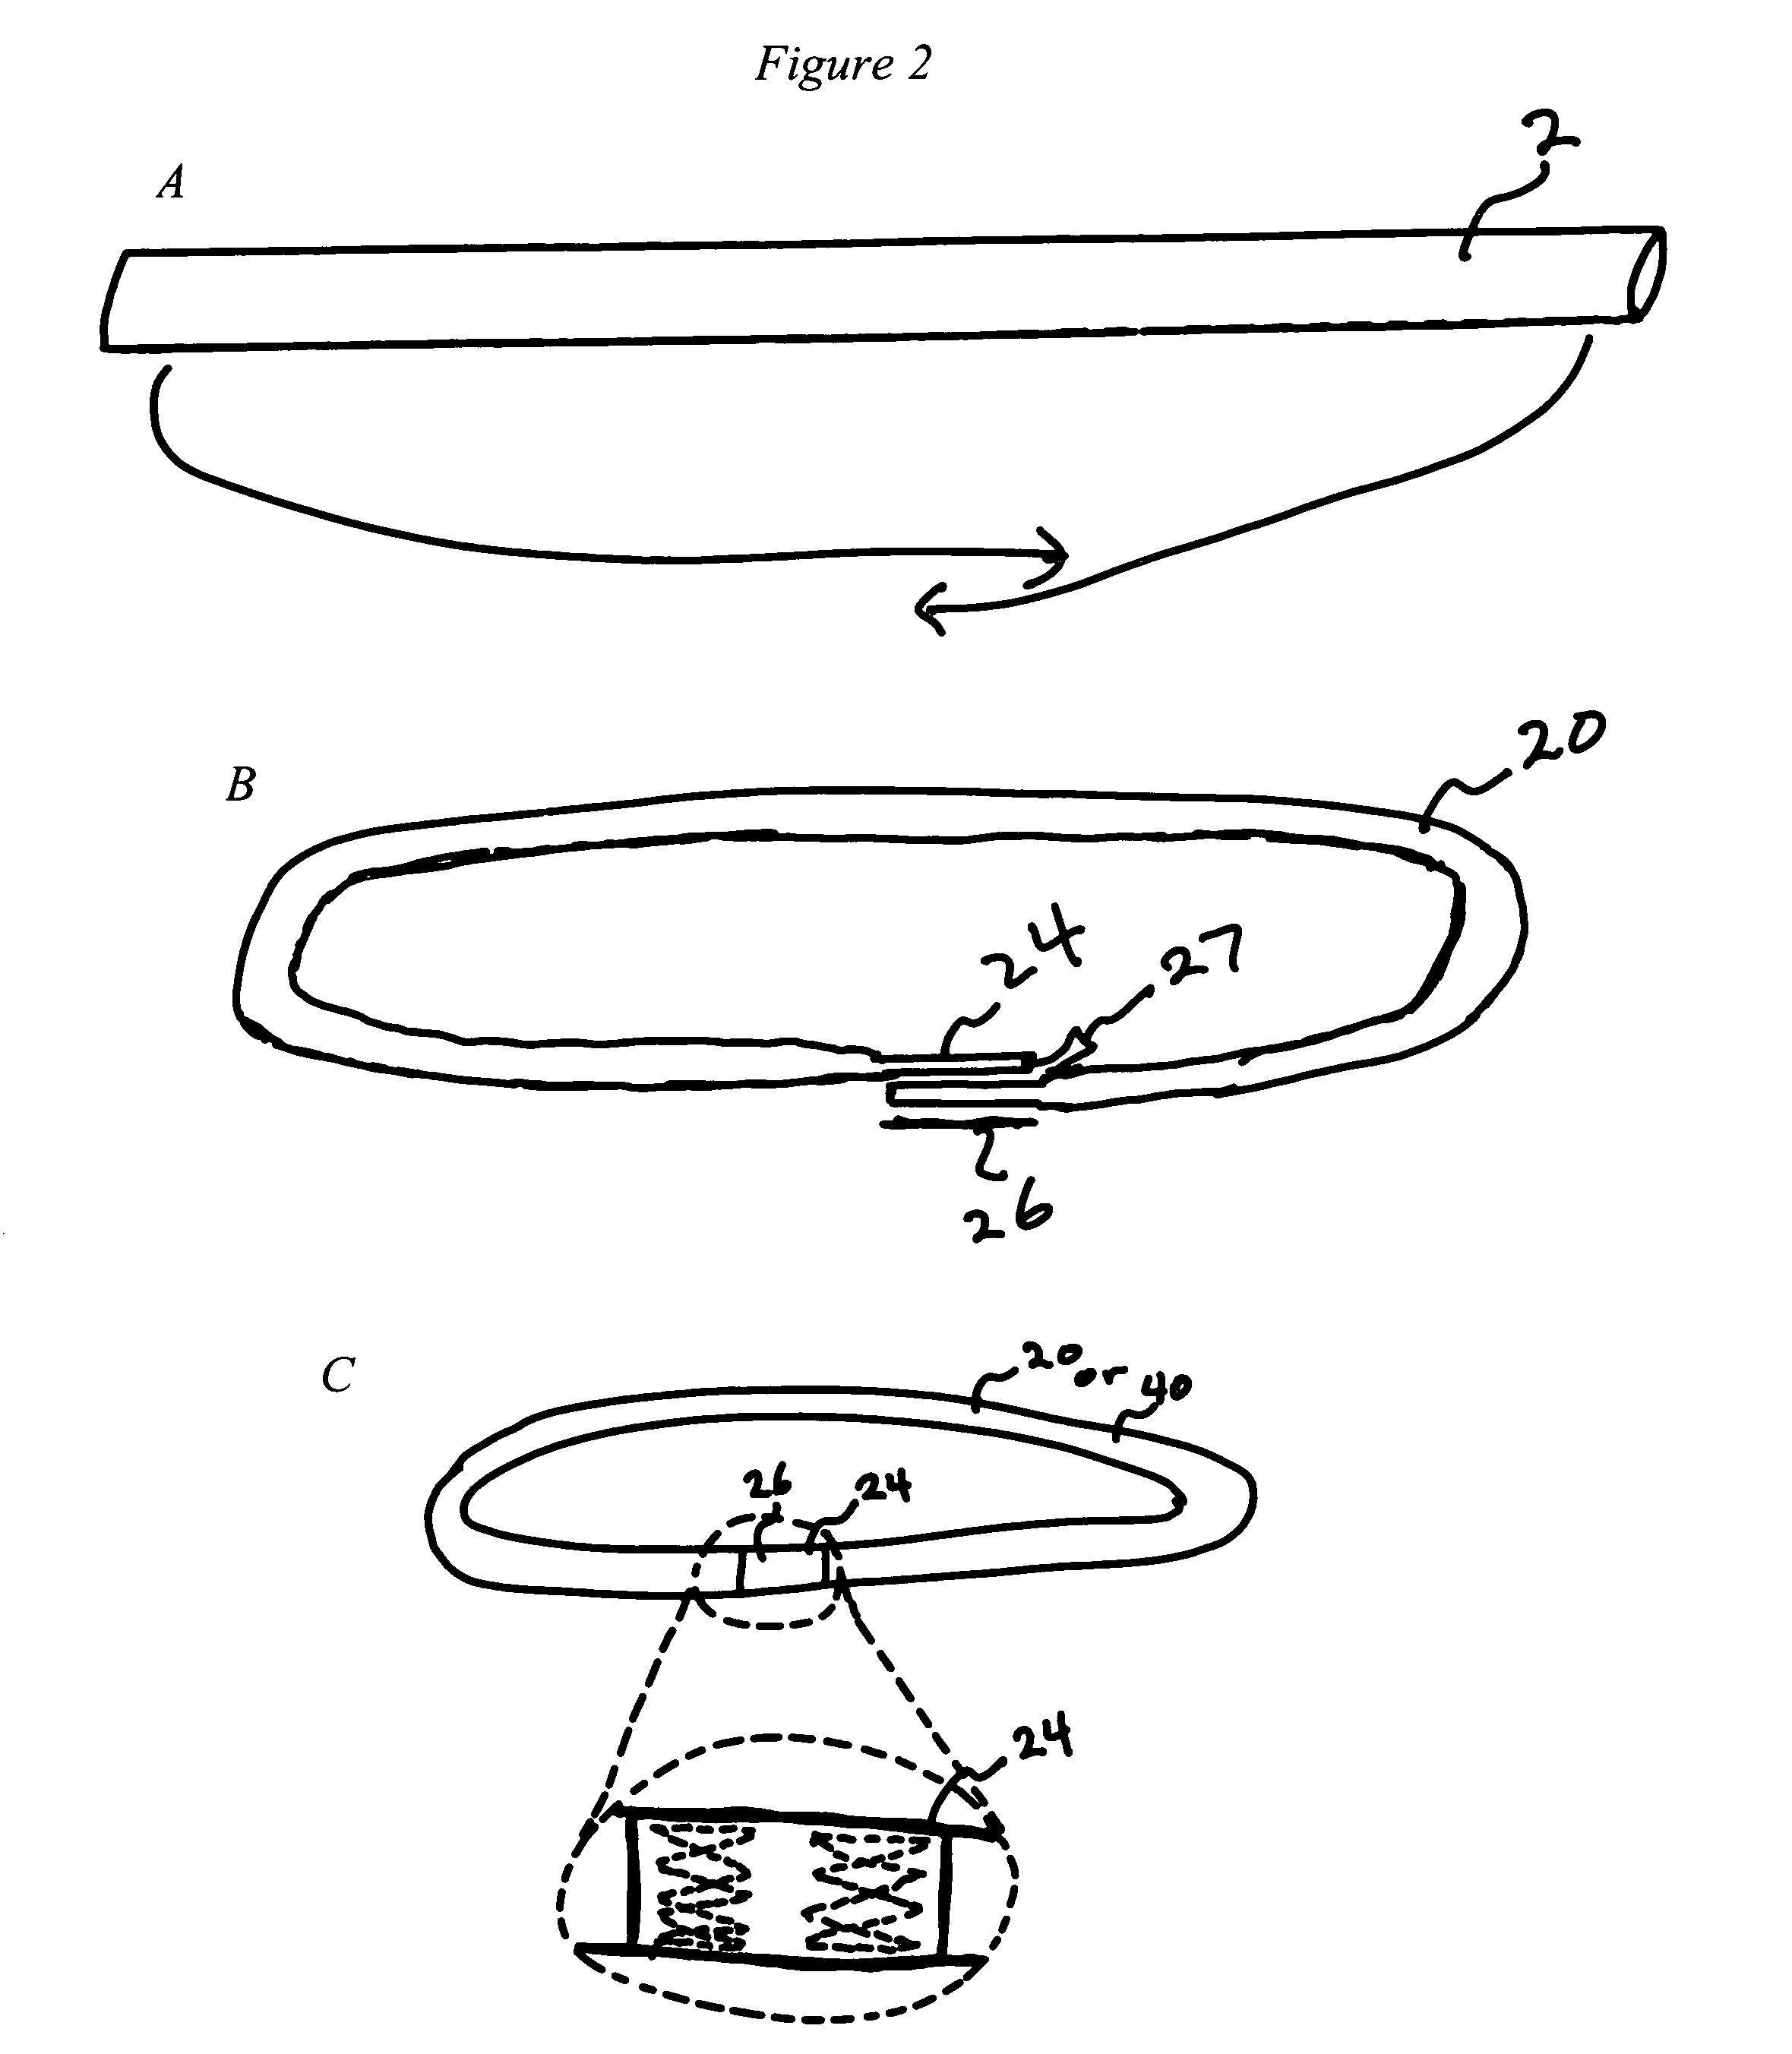 Method and apparatus for practicing yoga in and around trees